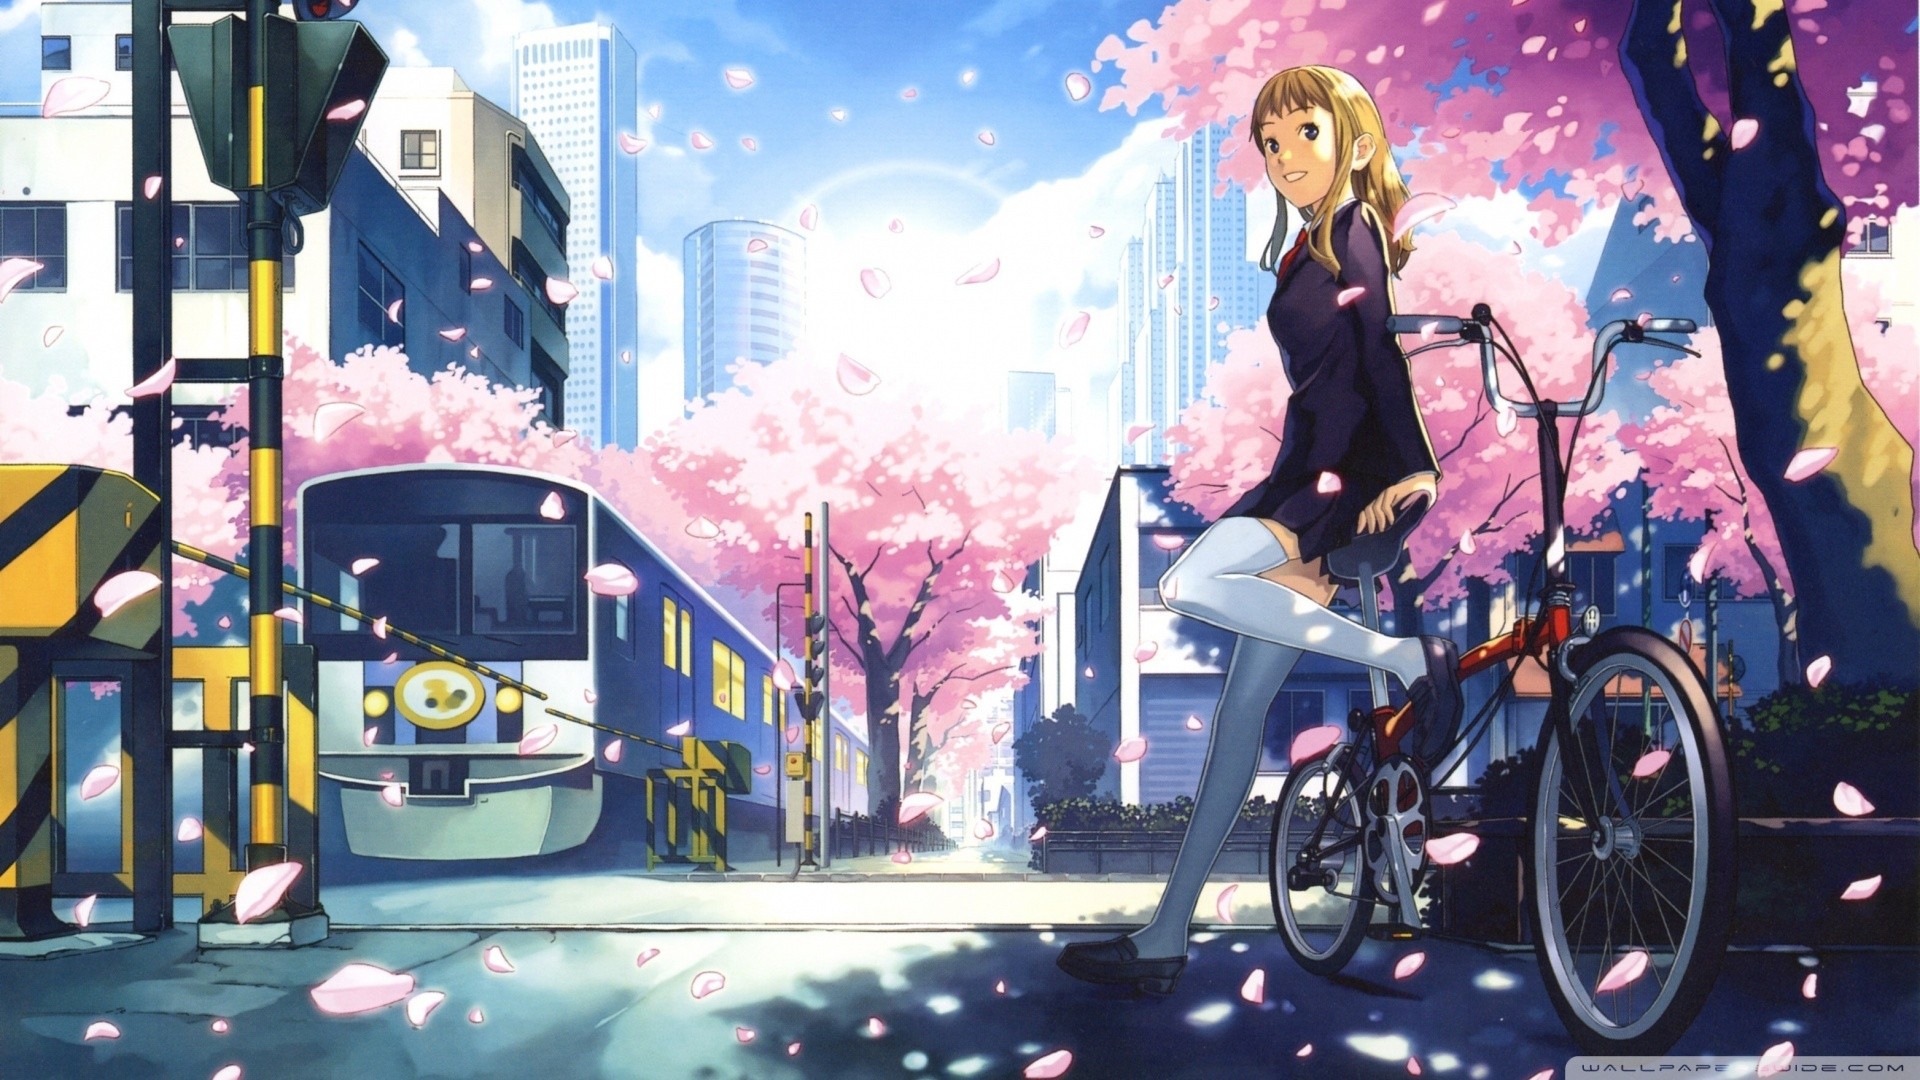 Anime 1920x1080 anime anime girls bicycle original characters cherry blossom thigh-highs city women with bicycles tram stockings smiling blonde women outdoors urban